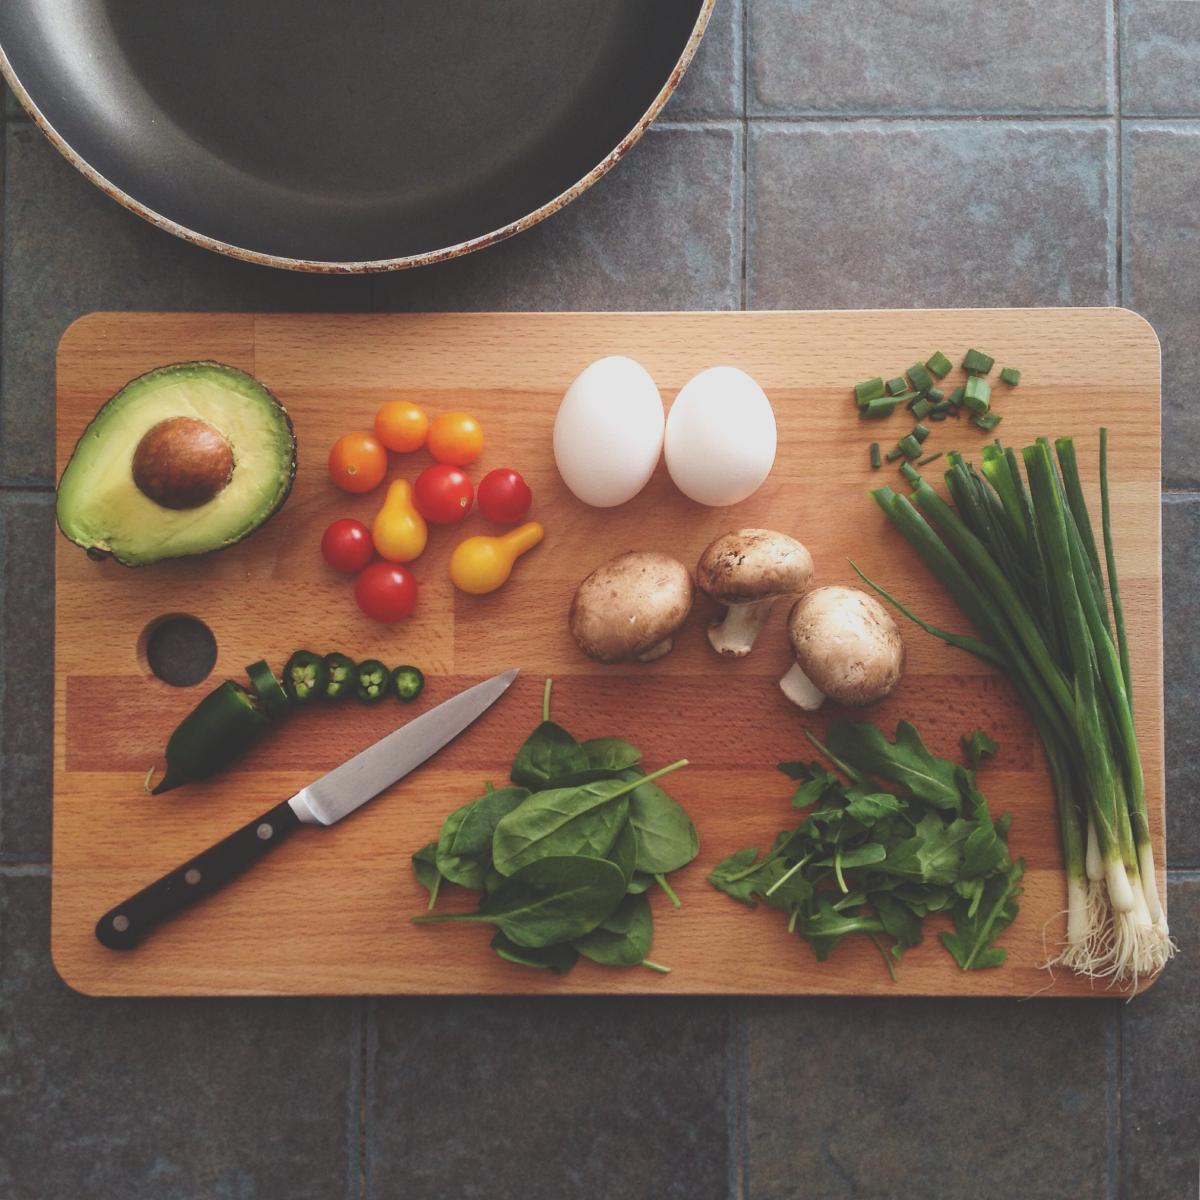 Mindful Cooking and Portion Control